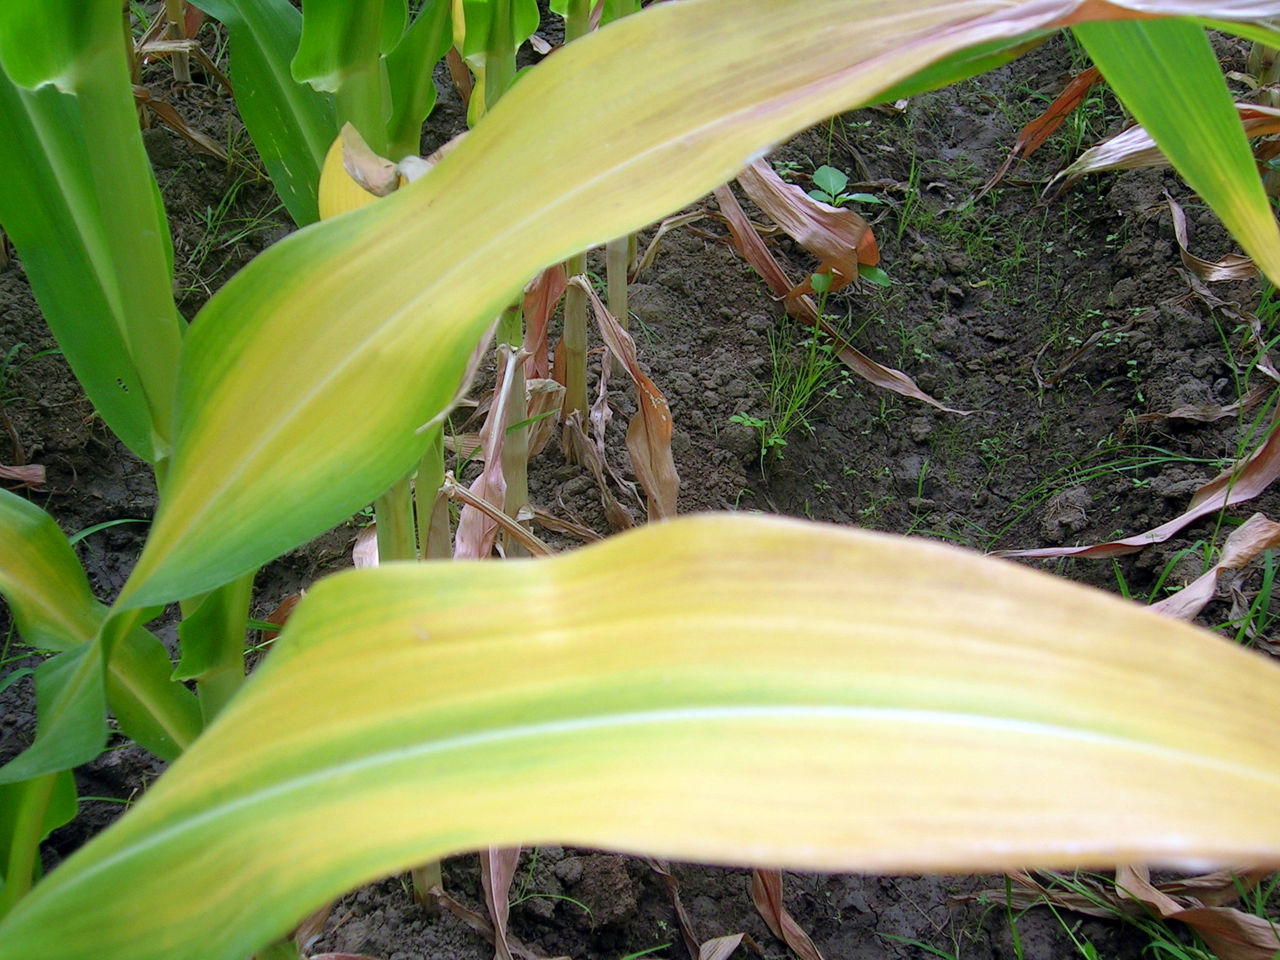 Figure 2. Nitrogen (N) Deficiency in Corn. Photo is provided courtesy of the International Plant Nutrition Institute (IPNI) and its IPNI Crop Nutrient Deficiency Image Collection, C.Witt, J.M. Pasuquin 